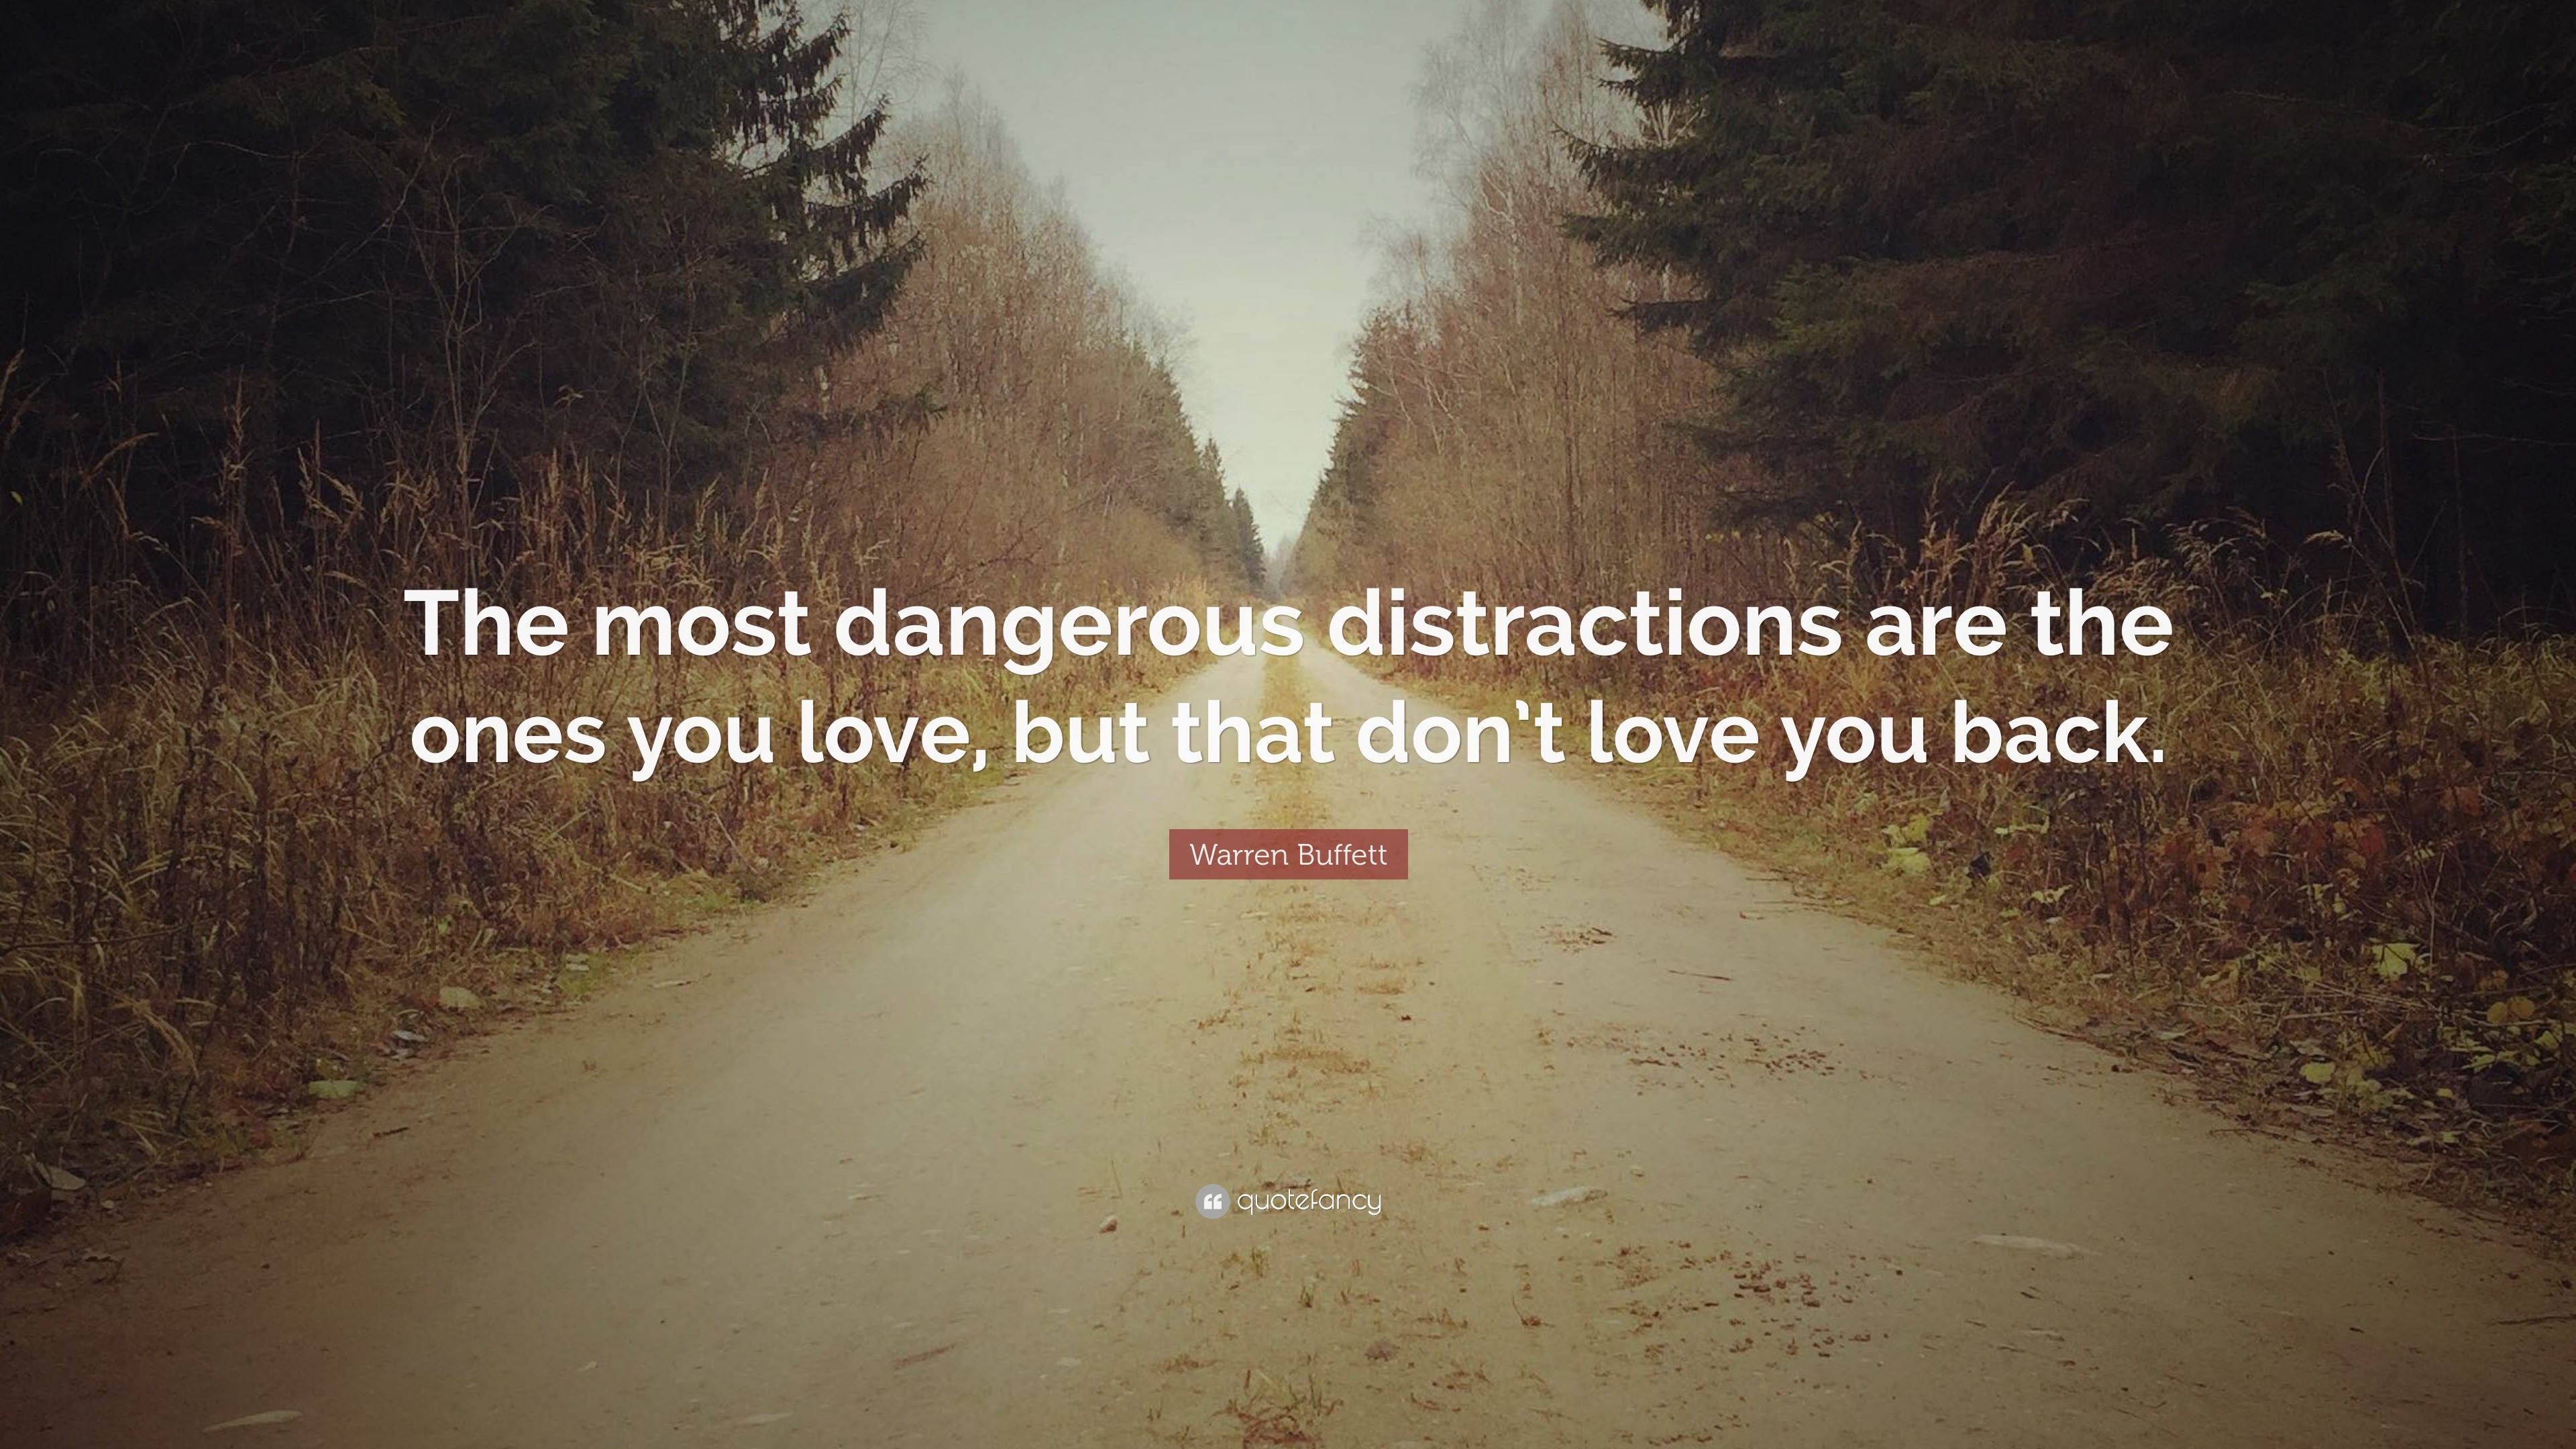 Warren Buffett Quote The Most Dangerous Distractions Are The Ones You Love But That Don T